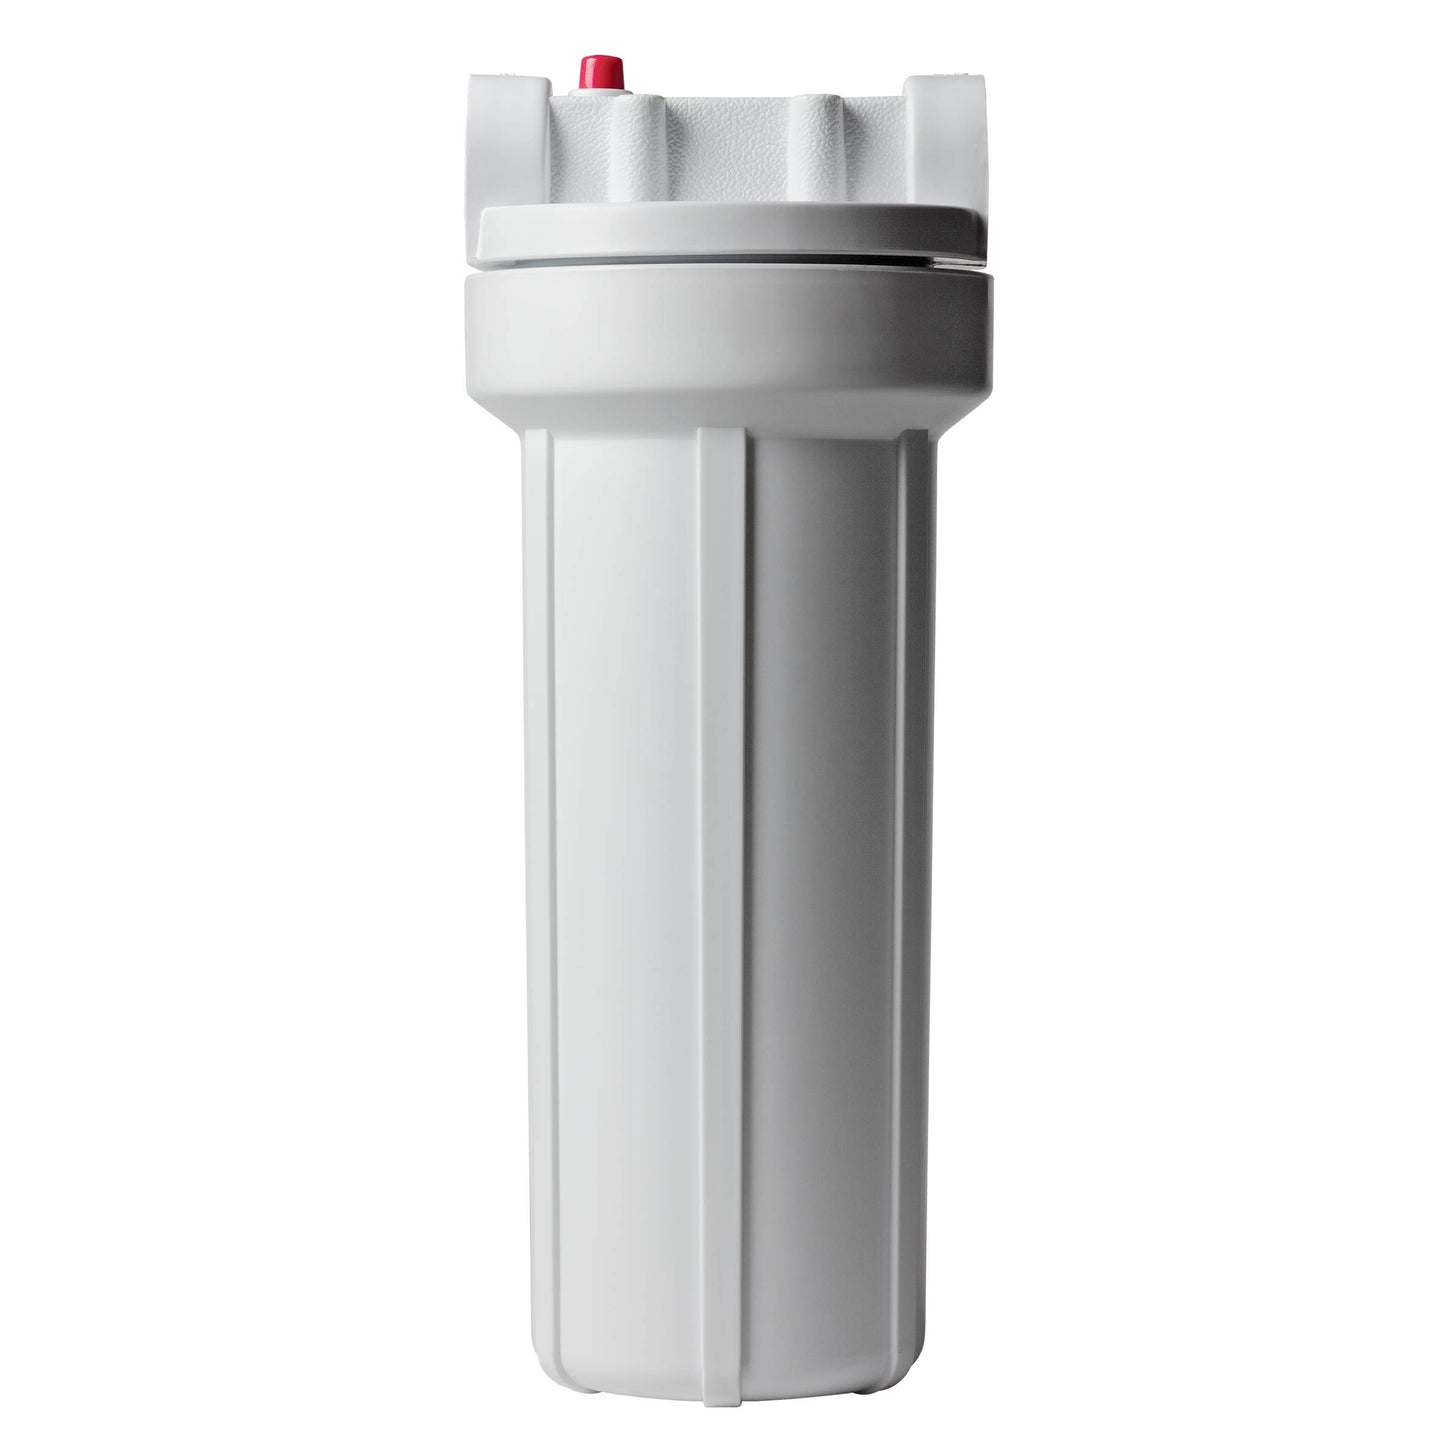 AO Smith Single-Stage Whole House Water Filtration System - Sediment Pre-Filter - NSF Certified - AO-WH-PRE - Like New